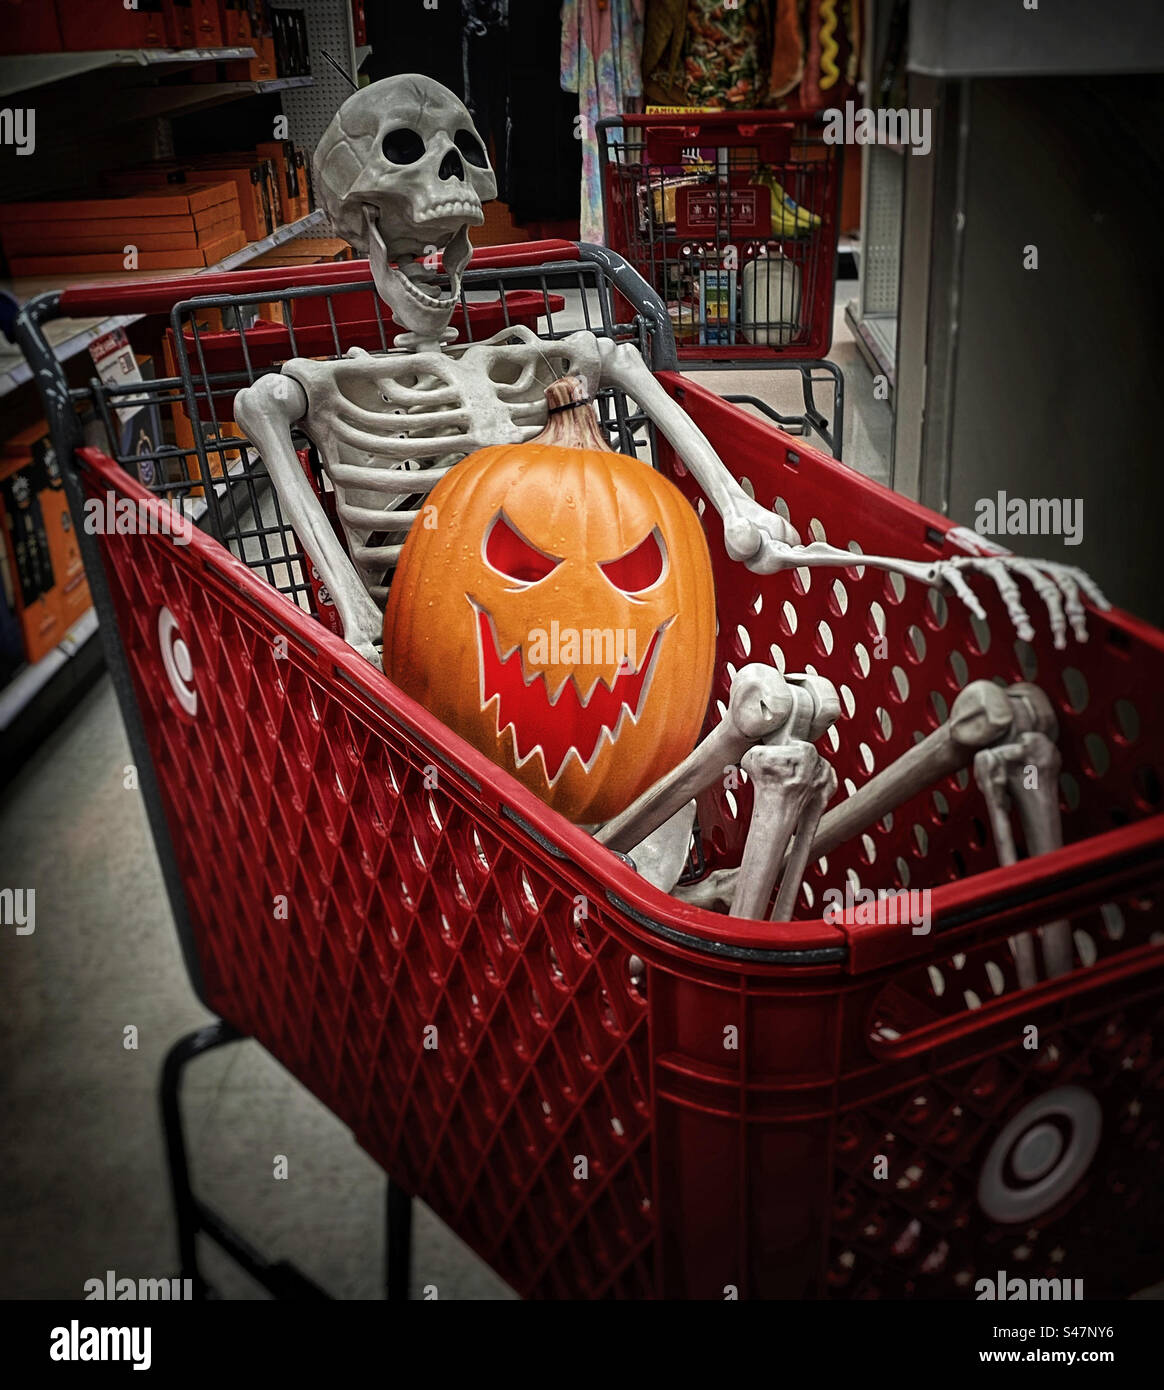 Halloween decorations in a shopping cart at a department store Stock Photo